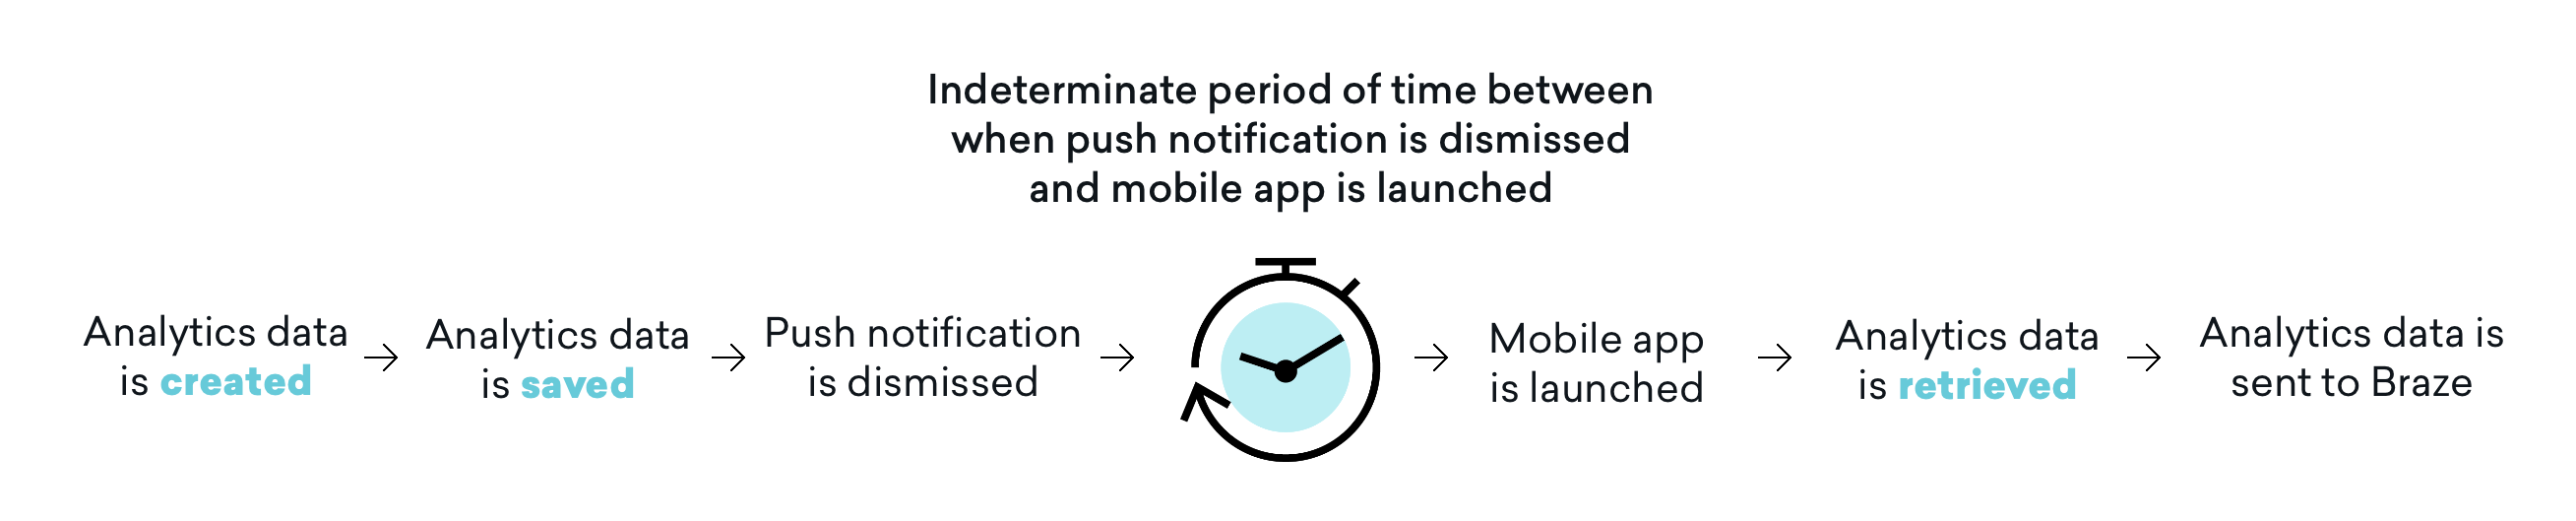 A graphic describing how analytics are processed in Braze. 1. Analytics data is created. 2. Analytics data is saved. 3. Push notification is dismissed. 4. Indeterminate period of time between when push notification is dismissed and mobile app is launched. 5. Mobile app is launched. 6. Analytics data is received. 7. Analytics data is sent to Braze.